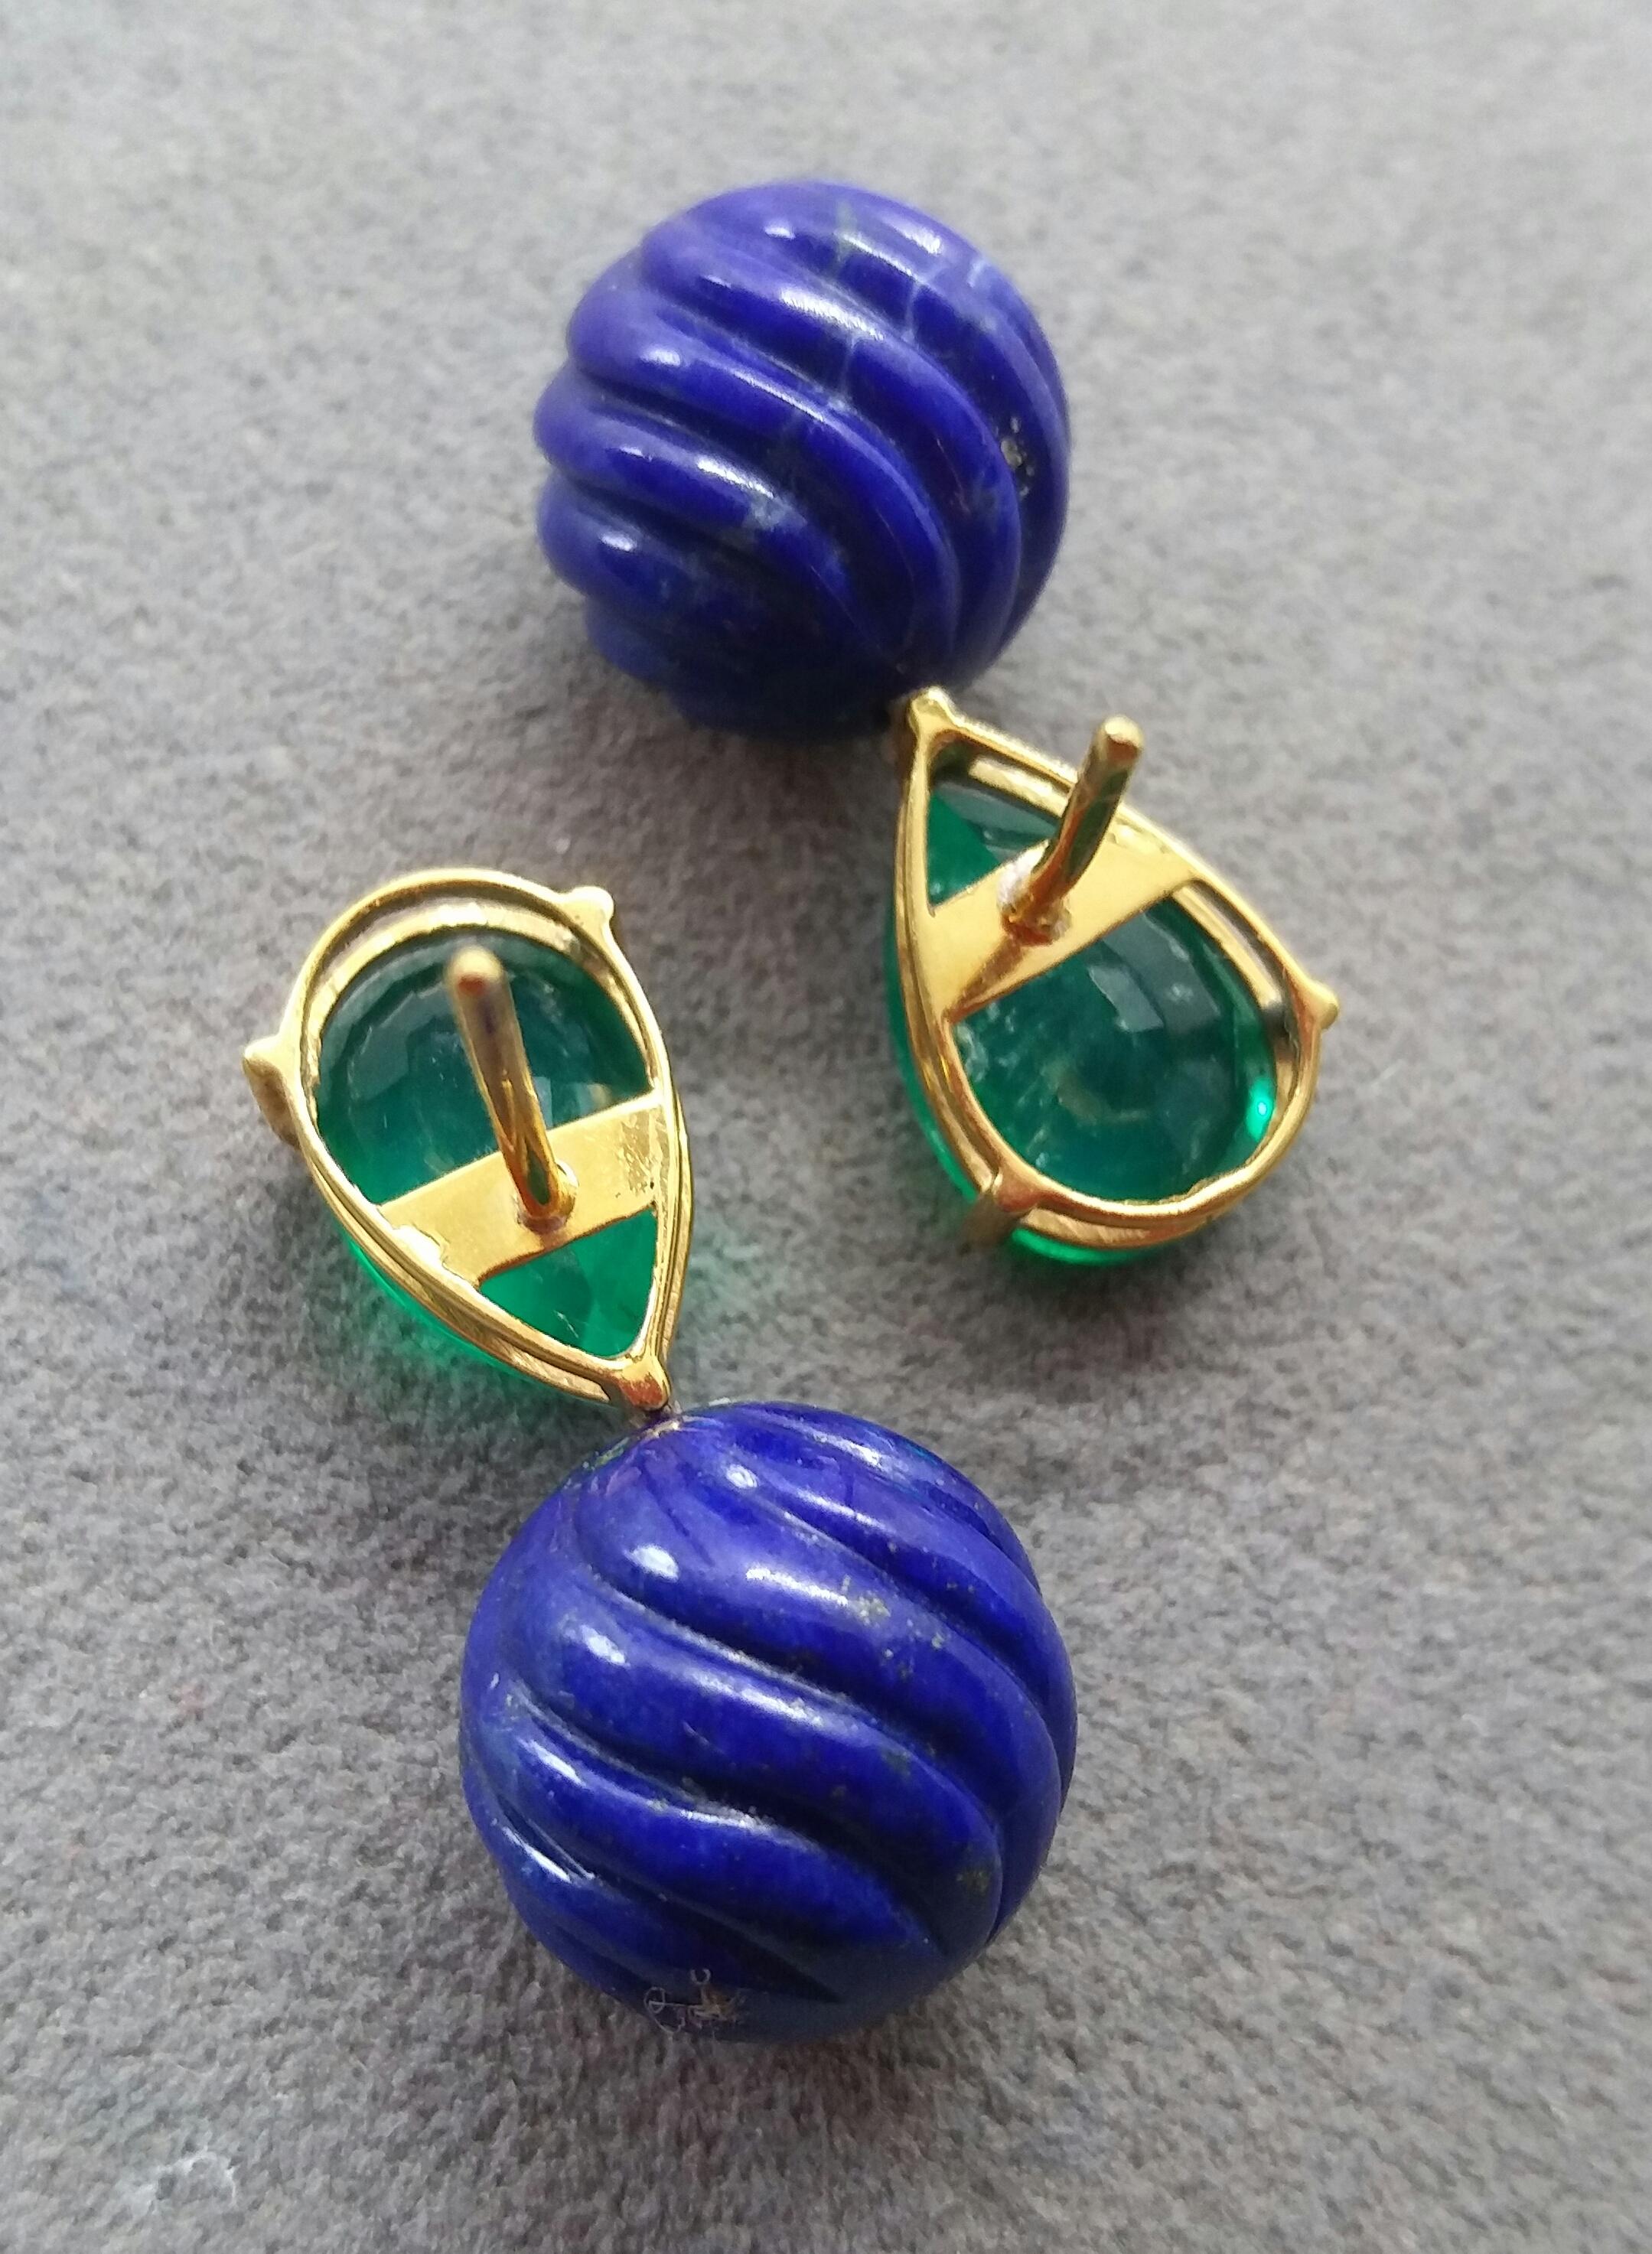 Mixed Cut Carved Lapis Lazuli Round Beads Green Quartz 14 Karat Yellow Gold Earrings For Sale